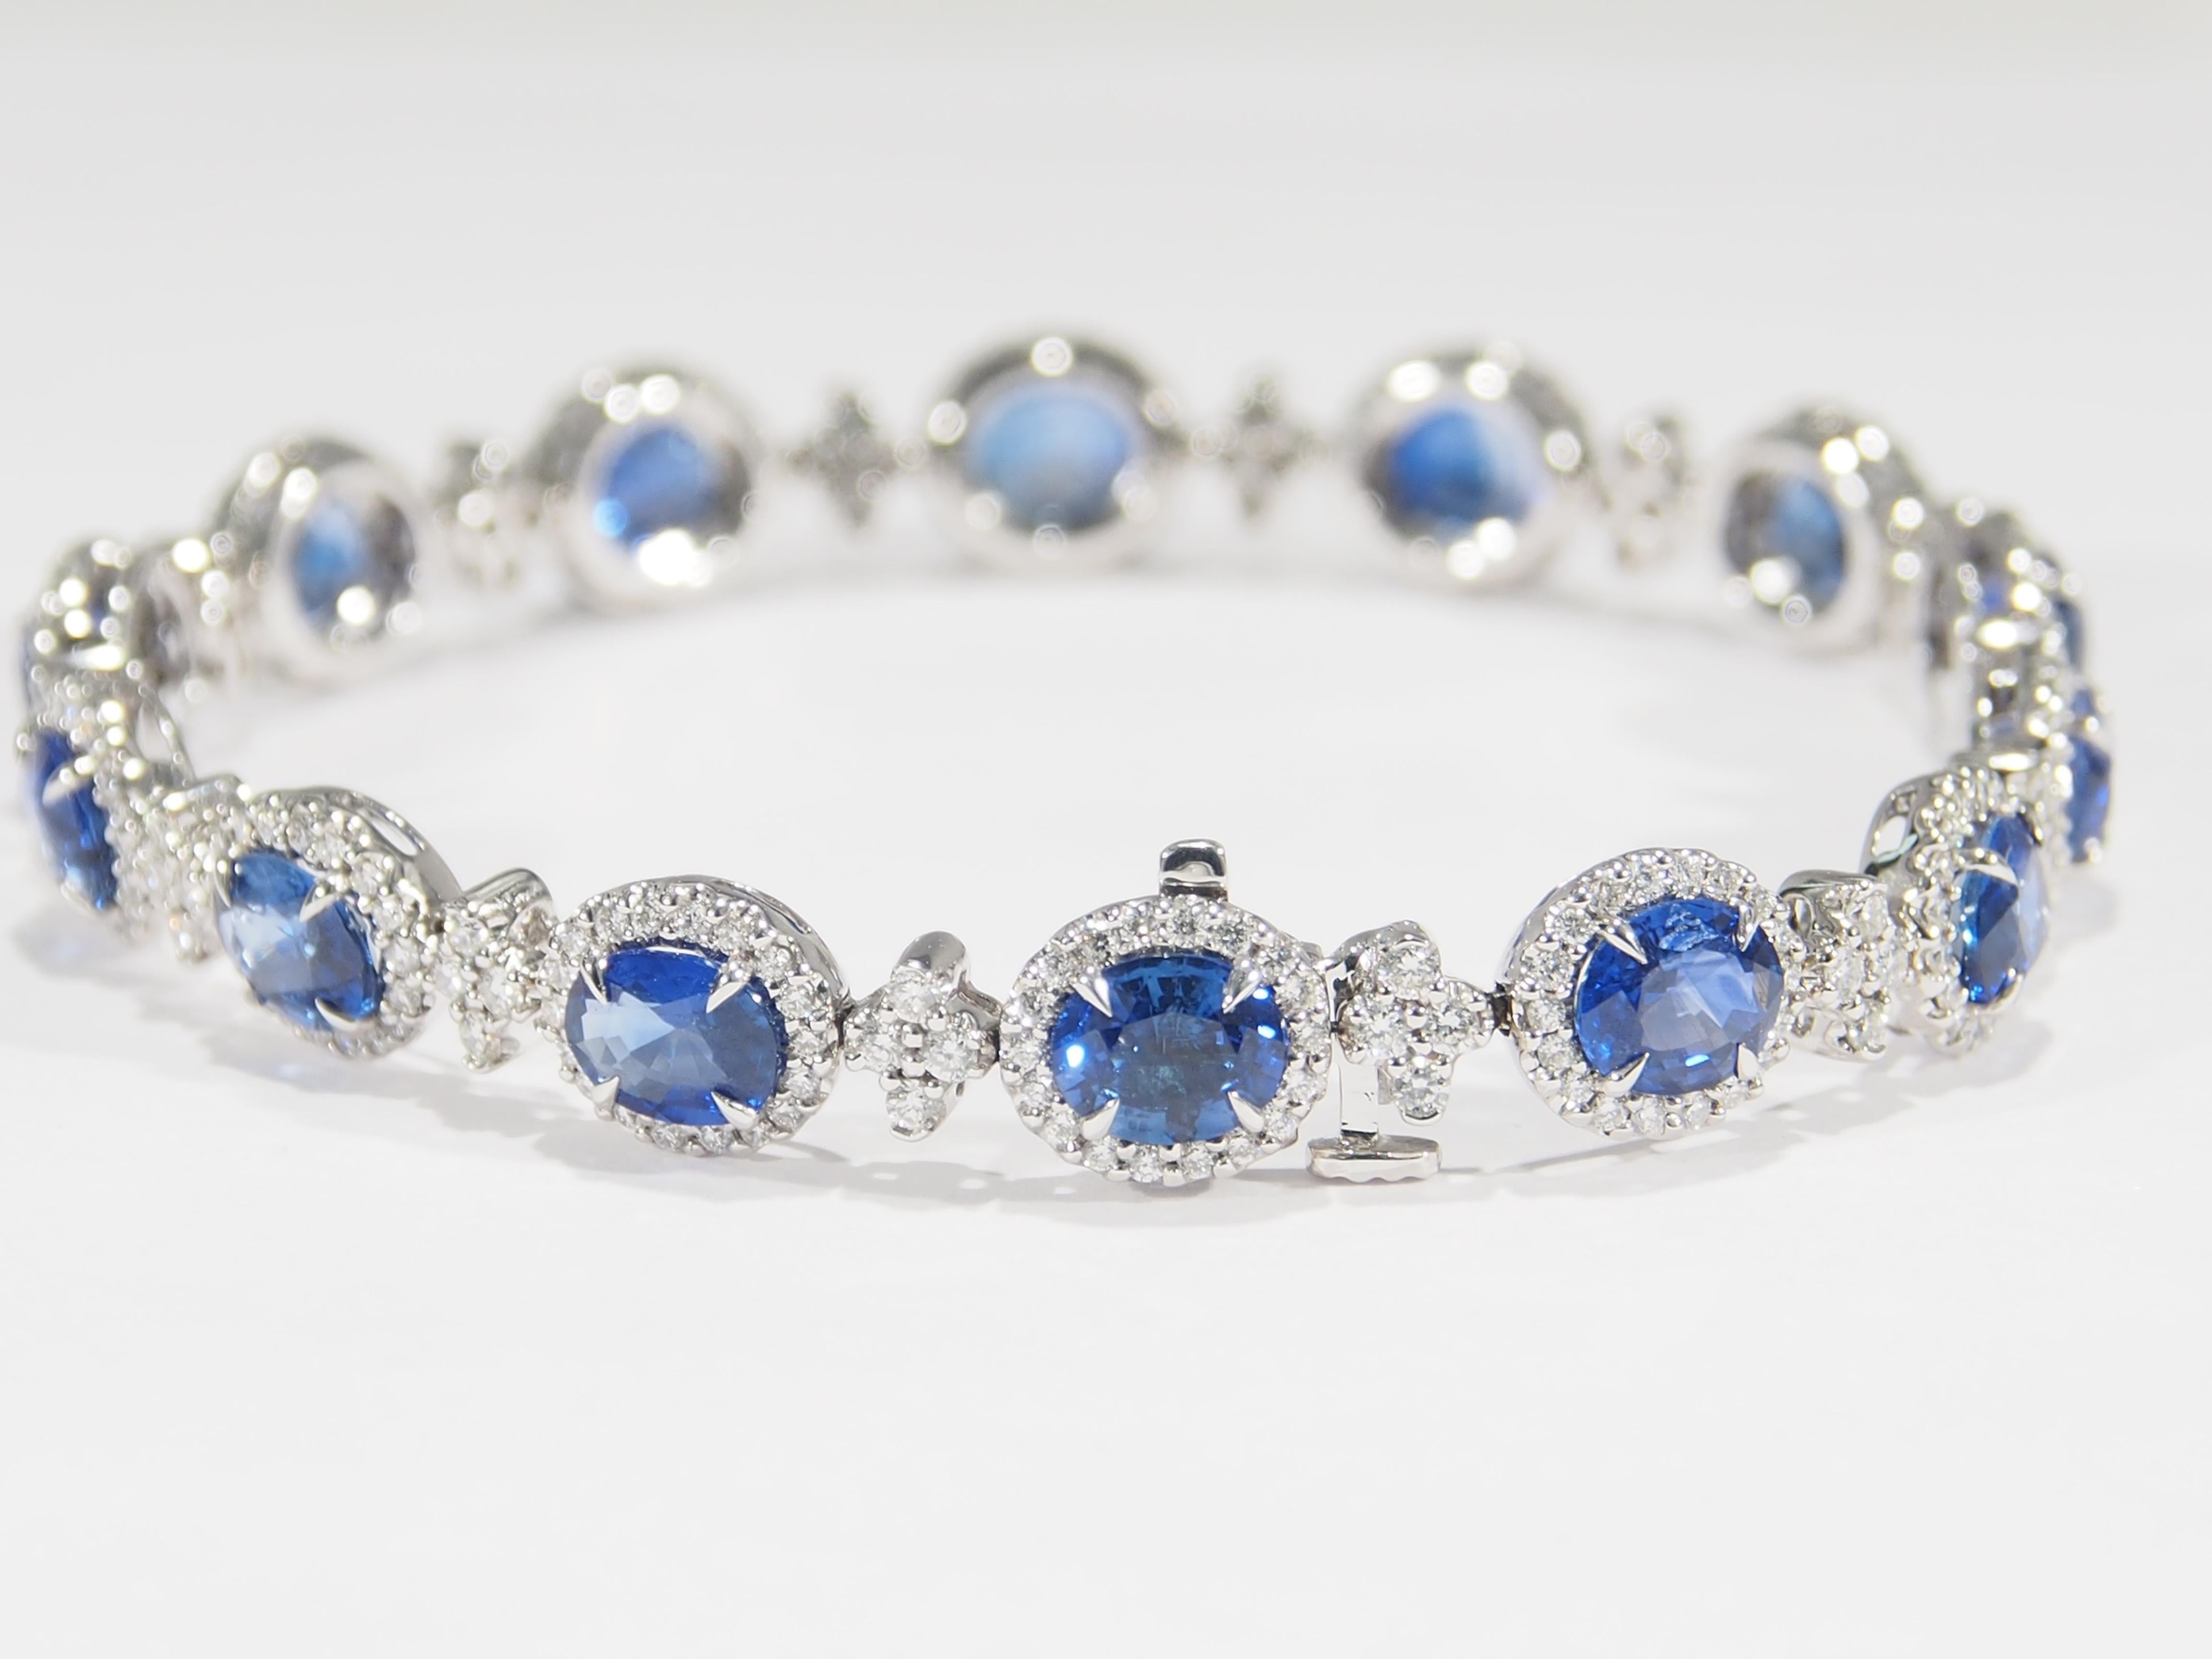 A gorgeous 18K white gold Diamond and Sapphire bracelet. 14 Oval Sapphires,10.49 total weight, are set with a diamond halo surrounding each Sapphire and diamond clusters between. Expertly set with 308 Round Brilliant Cut Diamonds G-H in color VS-SI